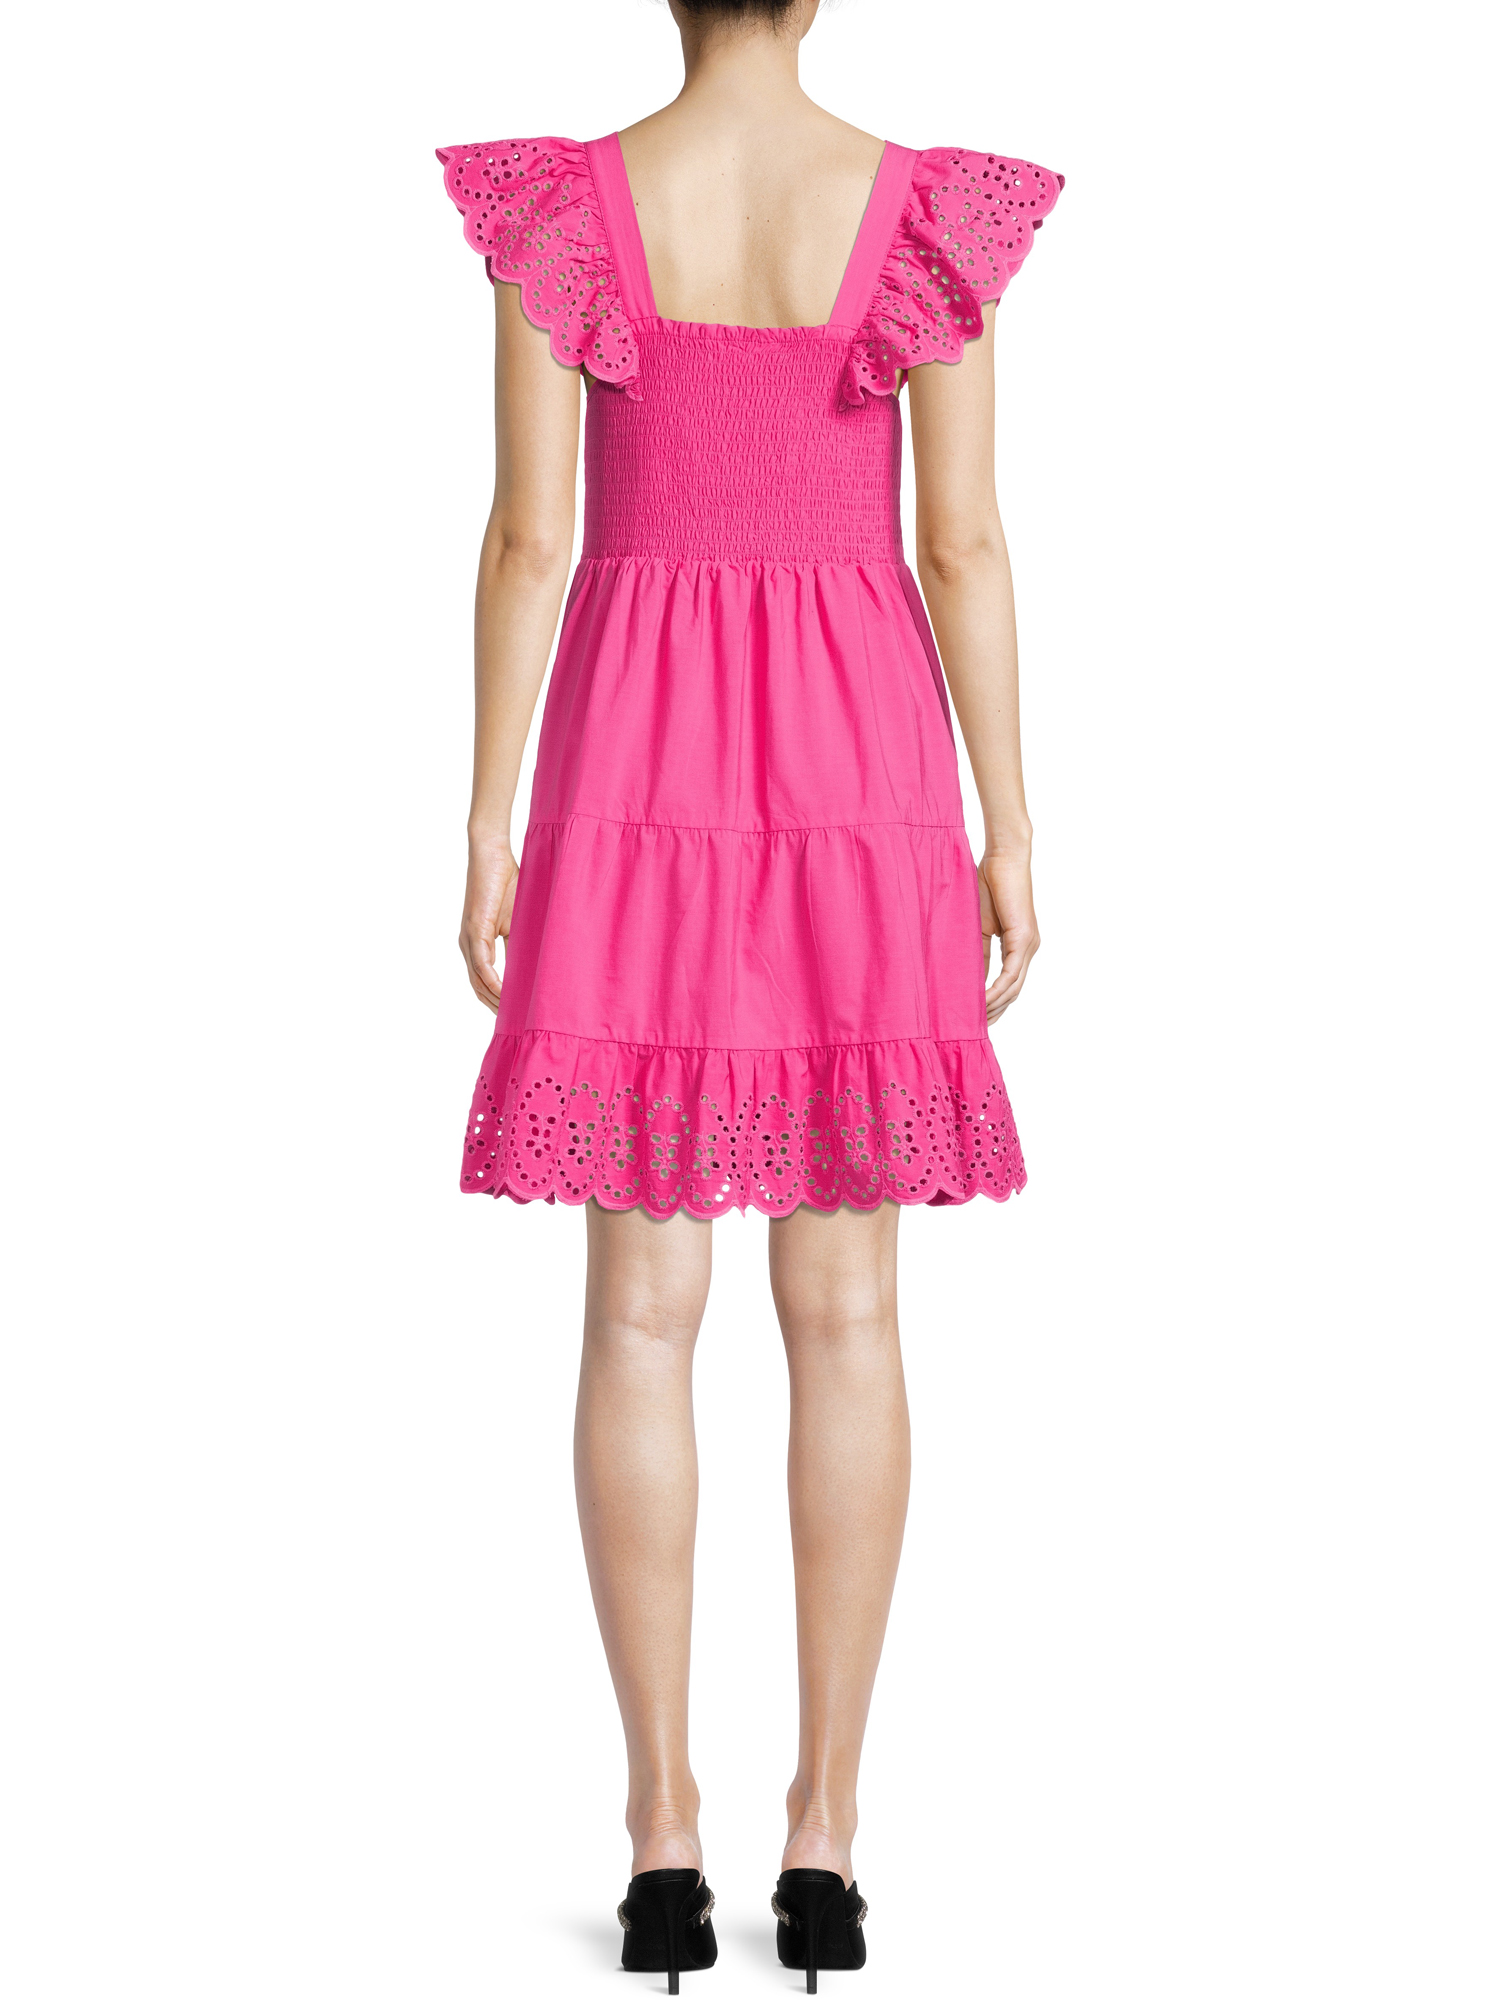 Time And Tru Women's Smocked Eyelet Dress - image 3 of 5